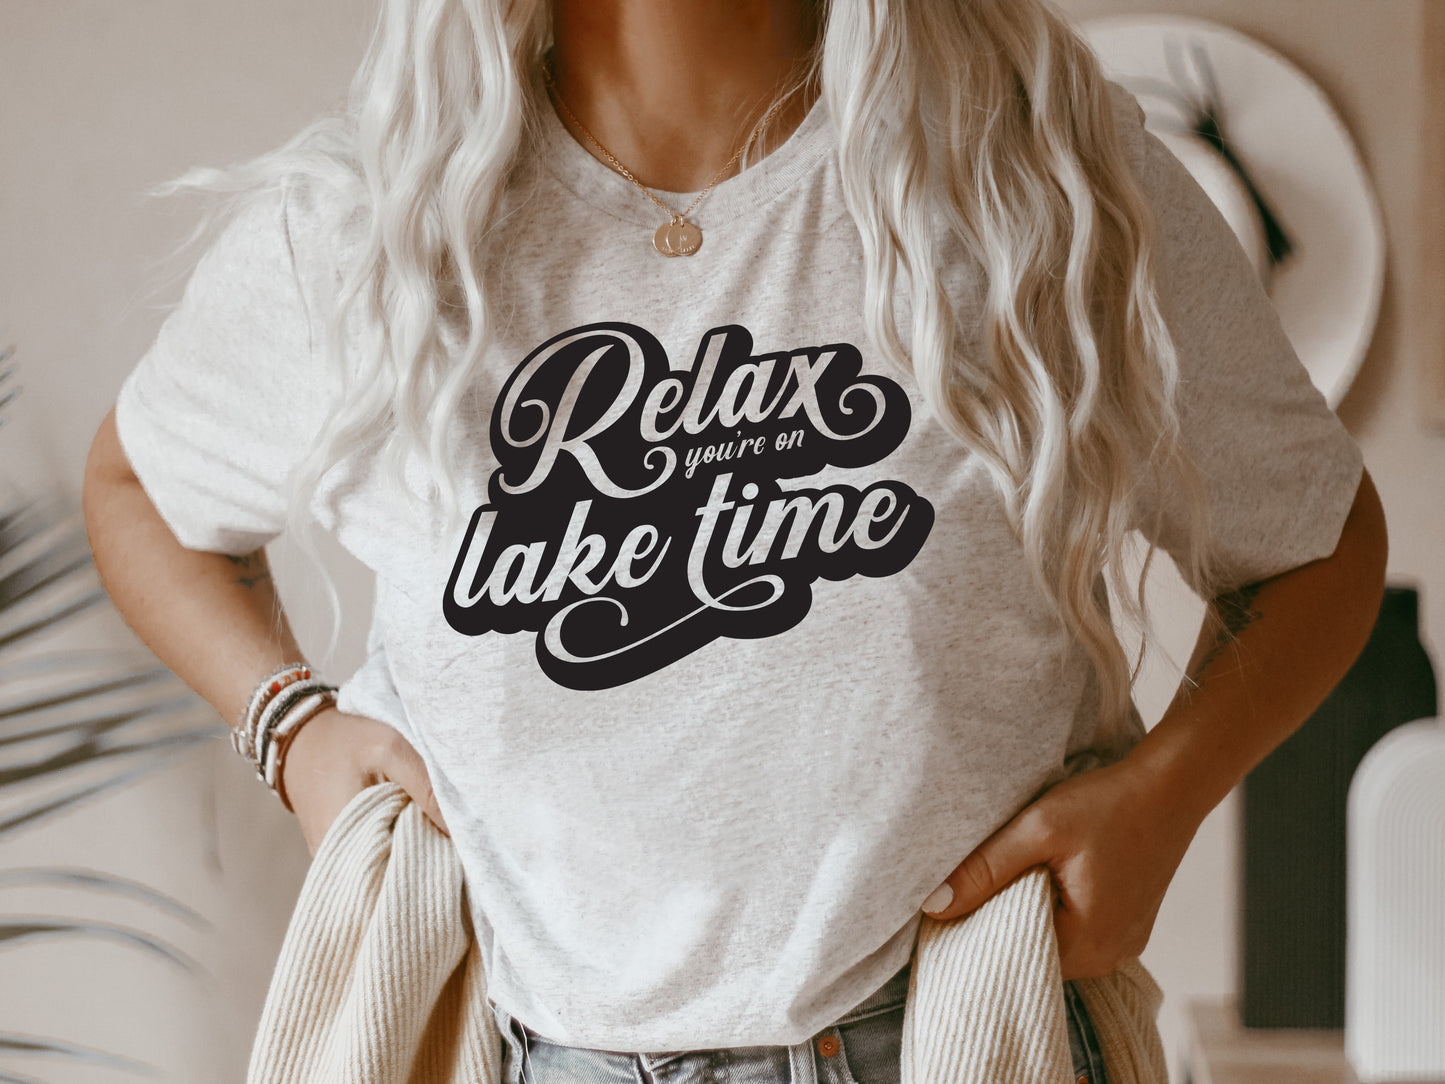 Relax You're on Lake Time Tee